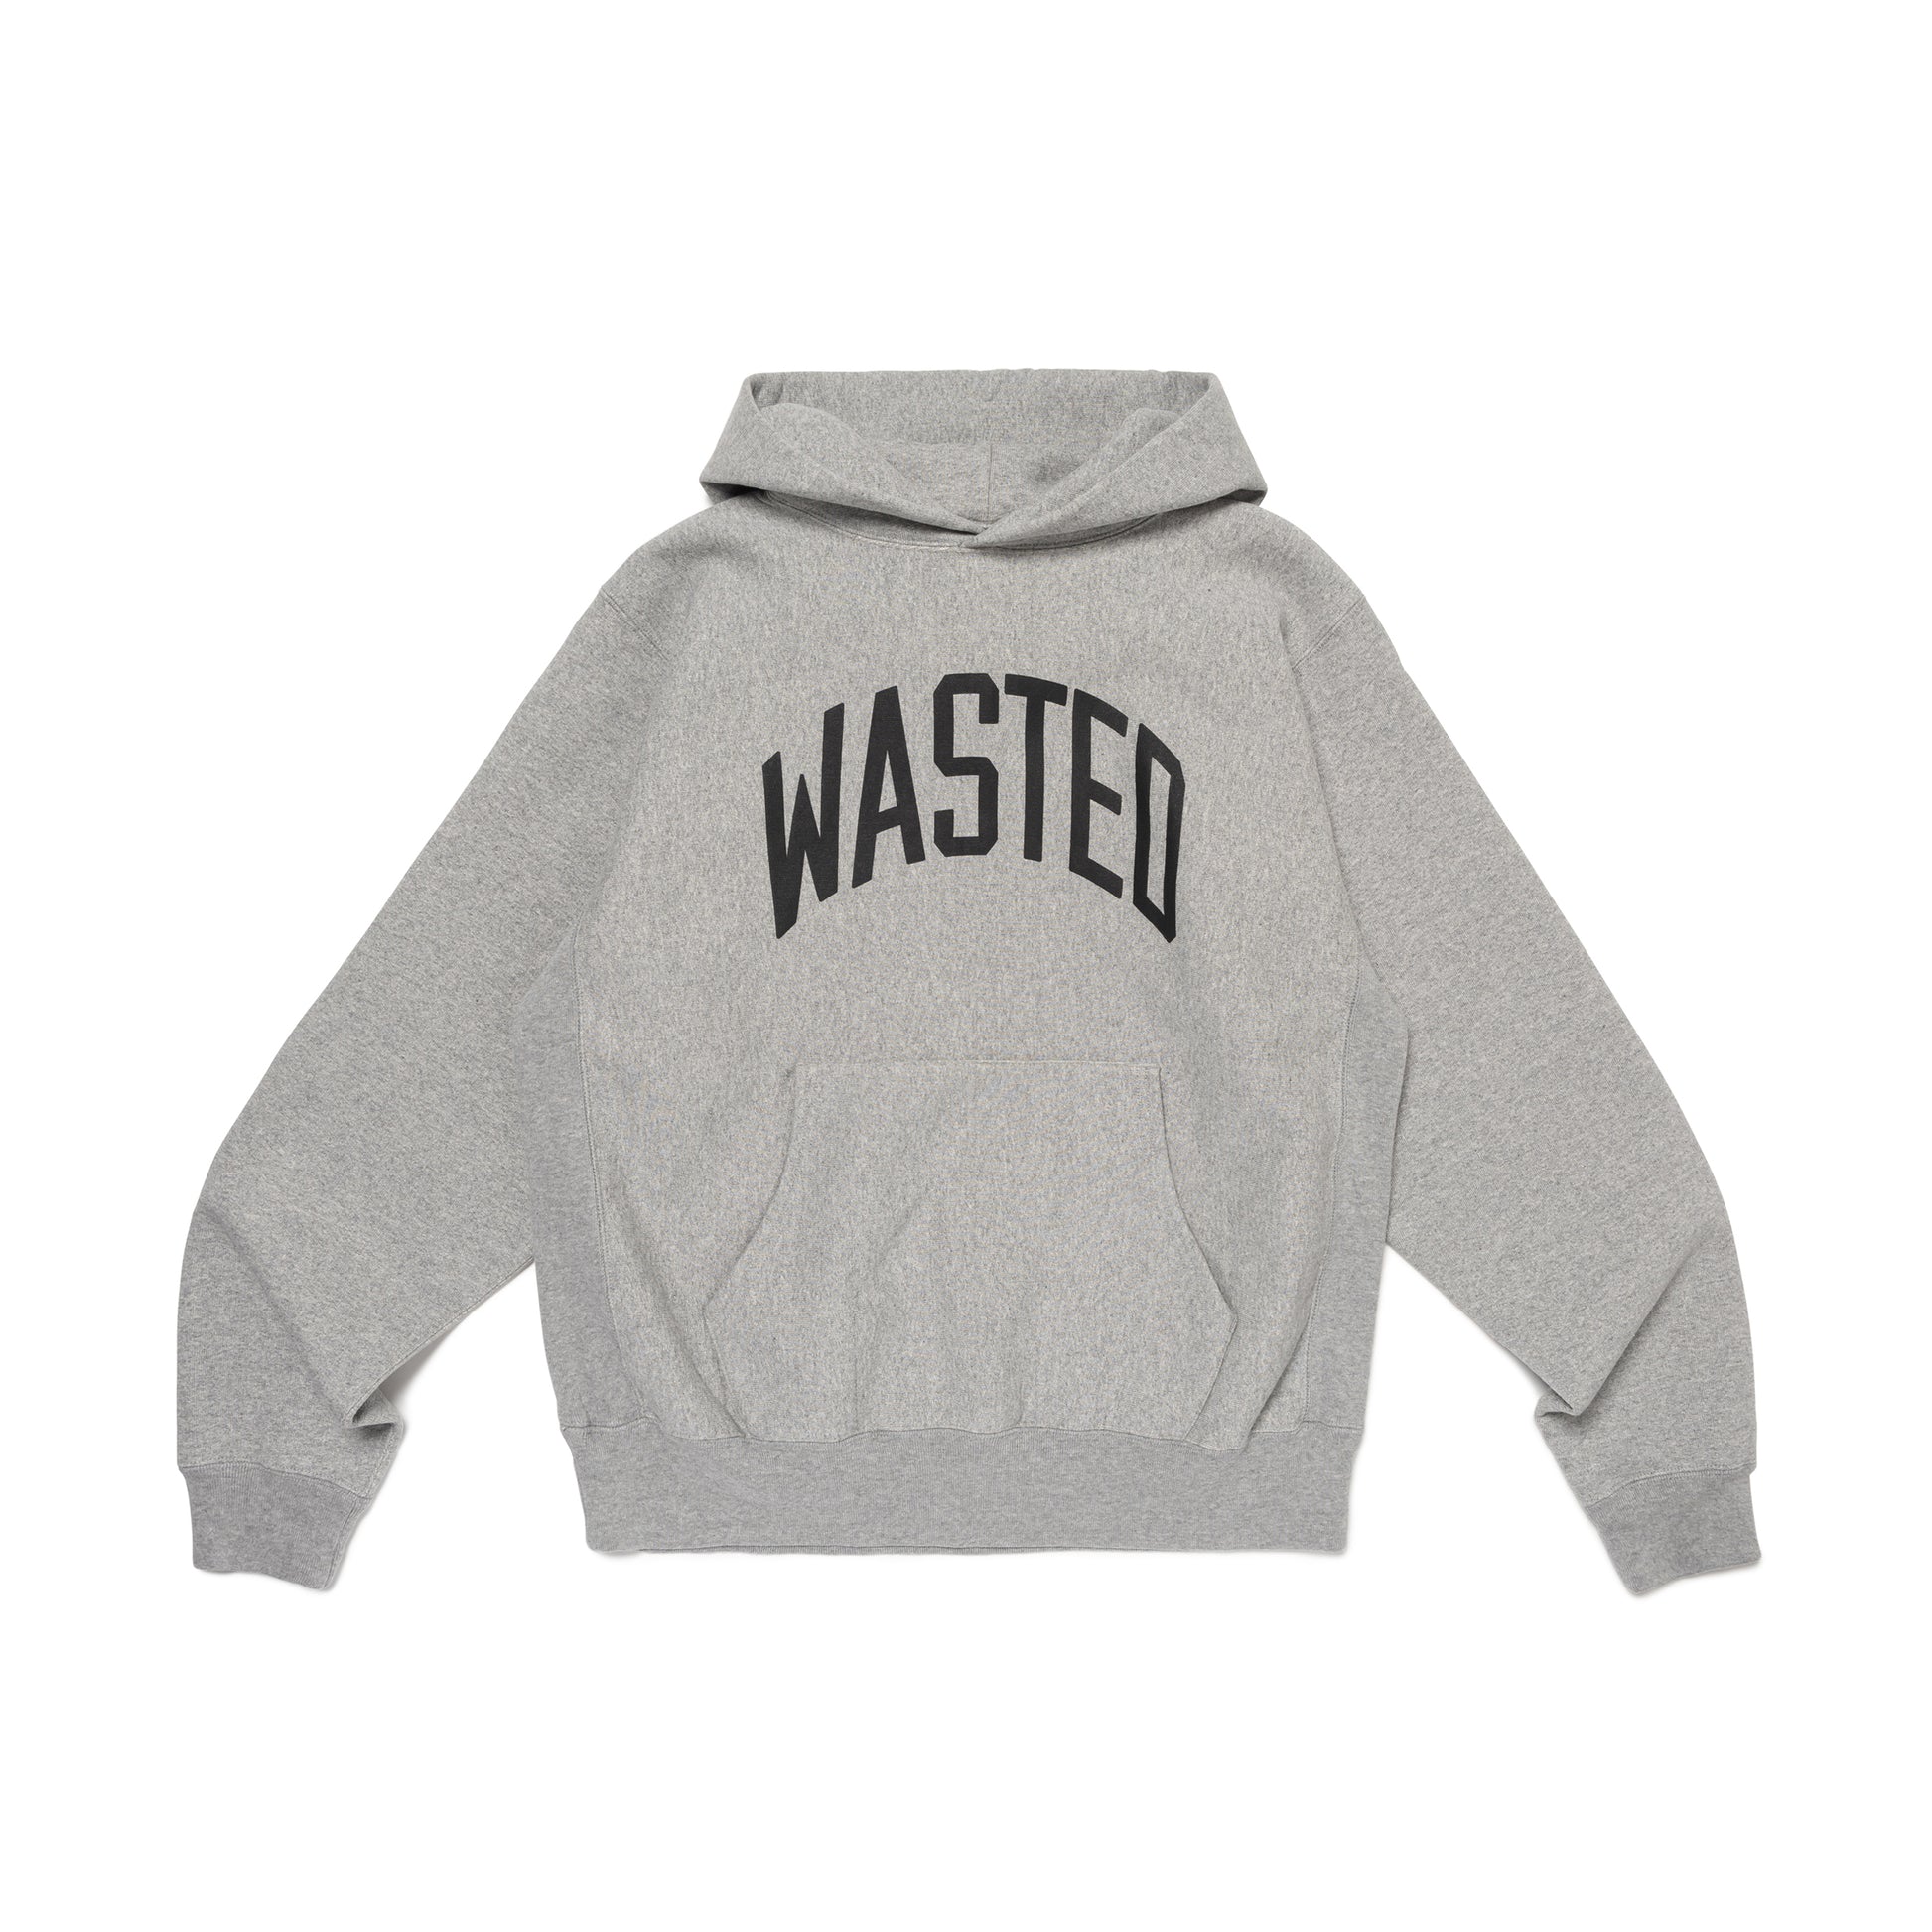 Wasted Youth HEAVY WEIGHT HOODIEwastedyouth